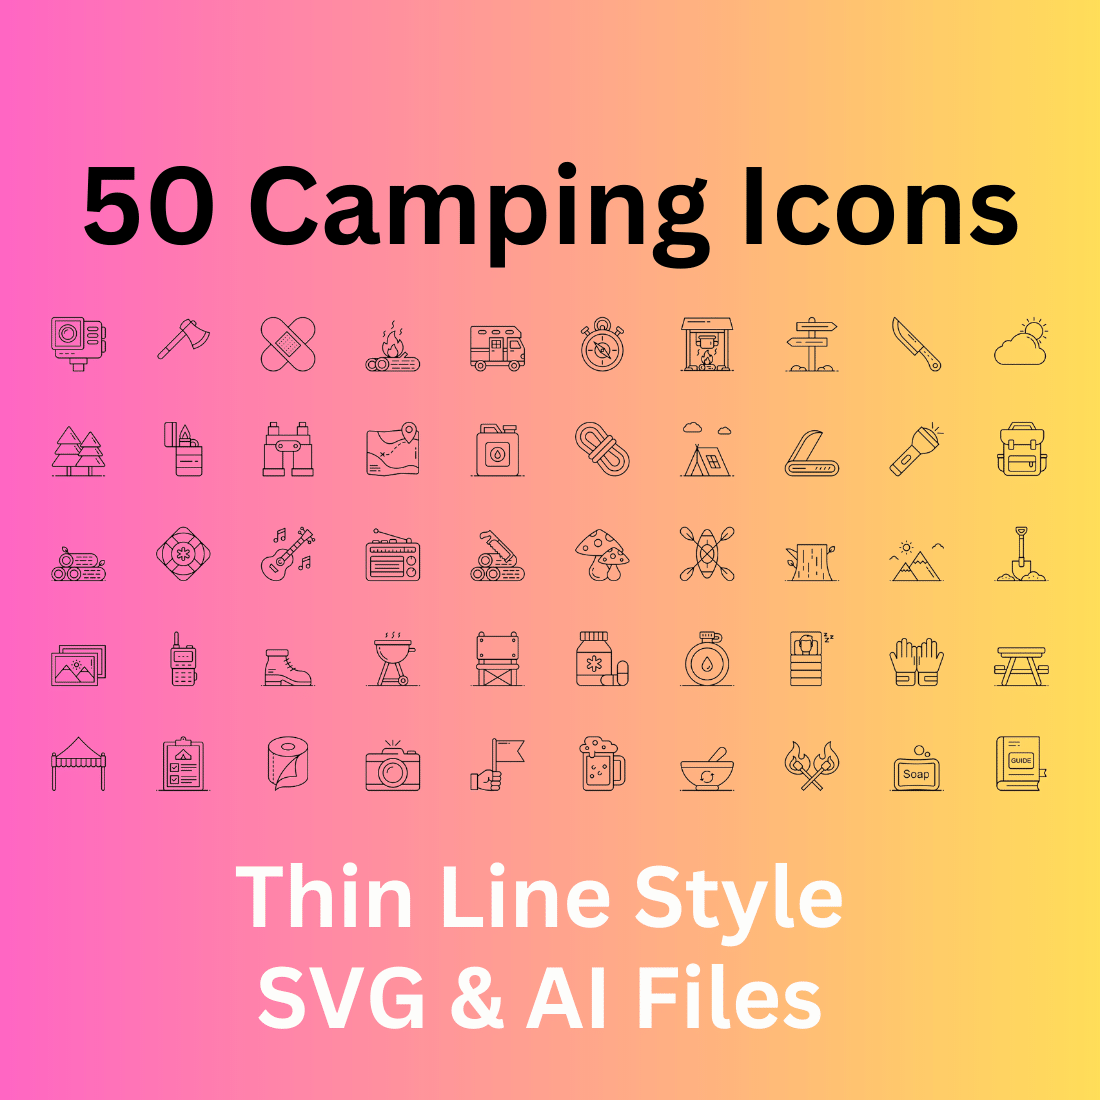 Camping Icon Set 50 Outline Icons - SVG And AI Files cover image.